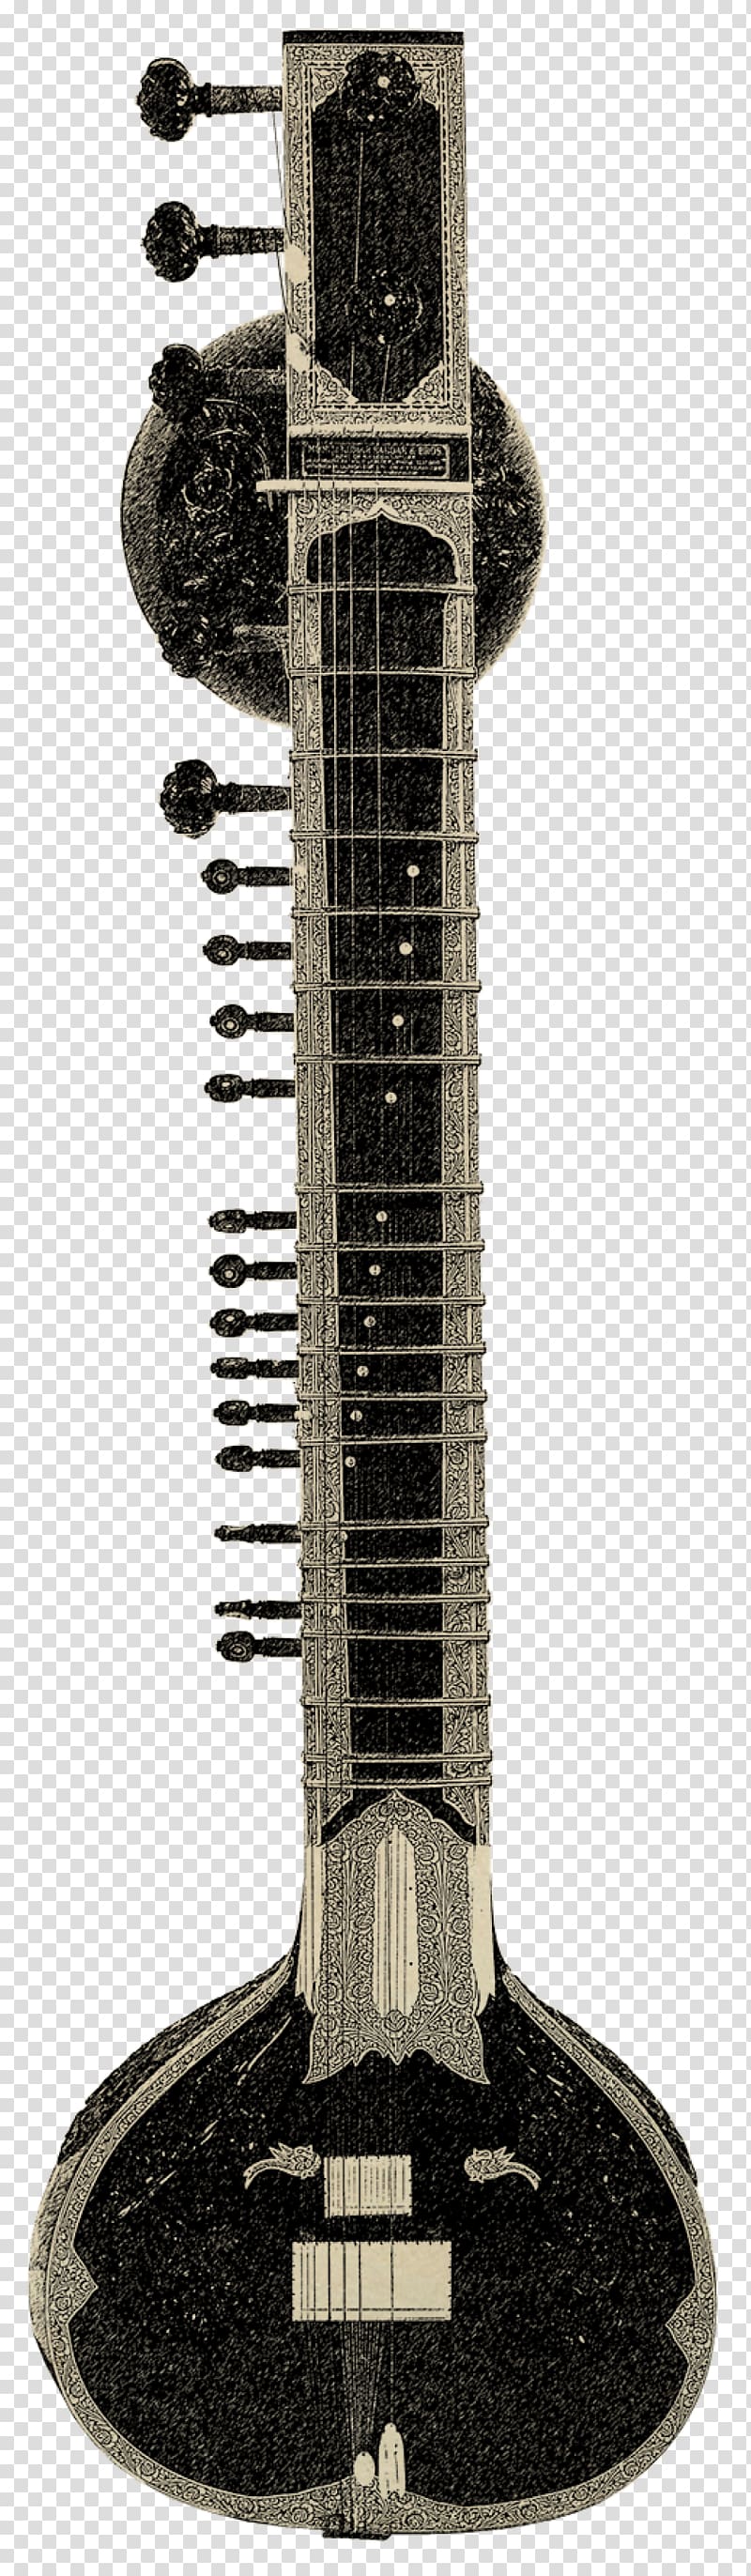 Musical Instruments Sitar Music of India Sympathetic string, Sitar transparent background PNG clipart